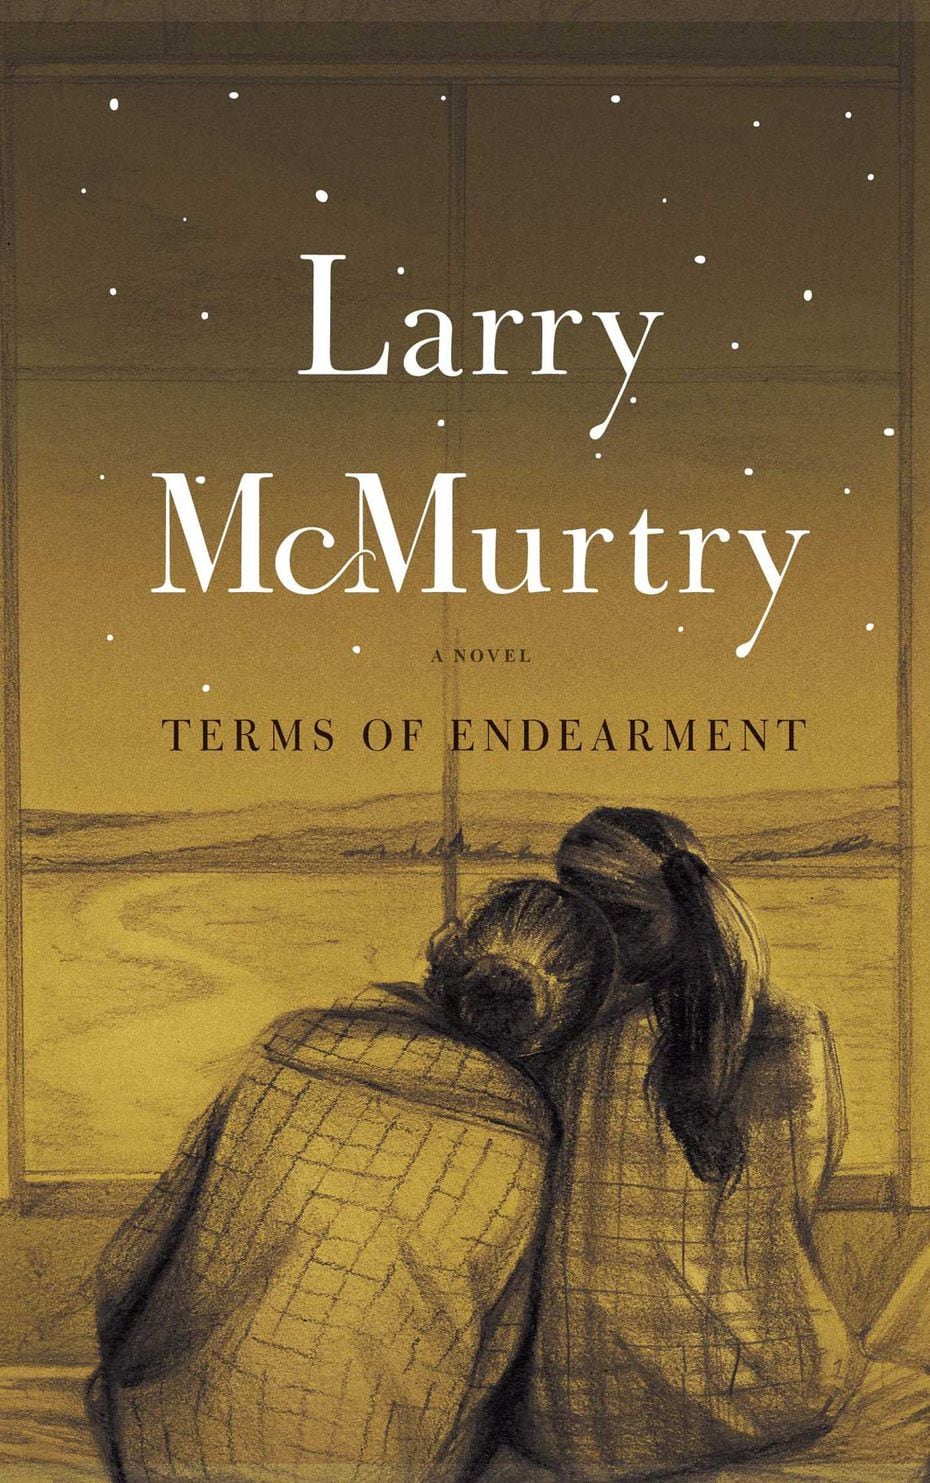 Terms of Endearment, by Larry McMurtry, 1975. Adapted for film as Terms of Endearment (1983)